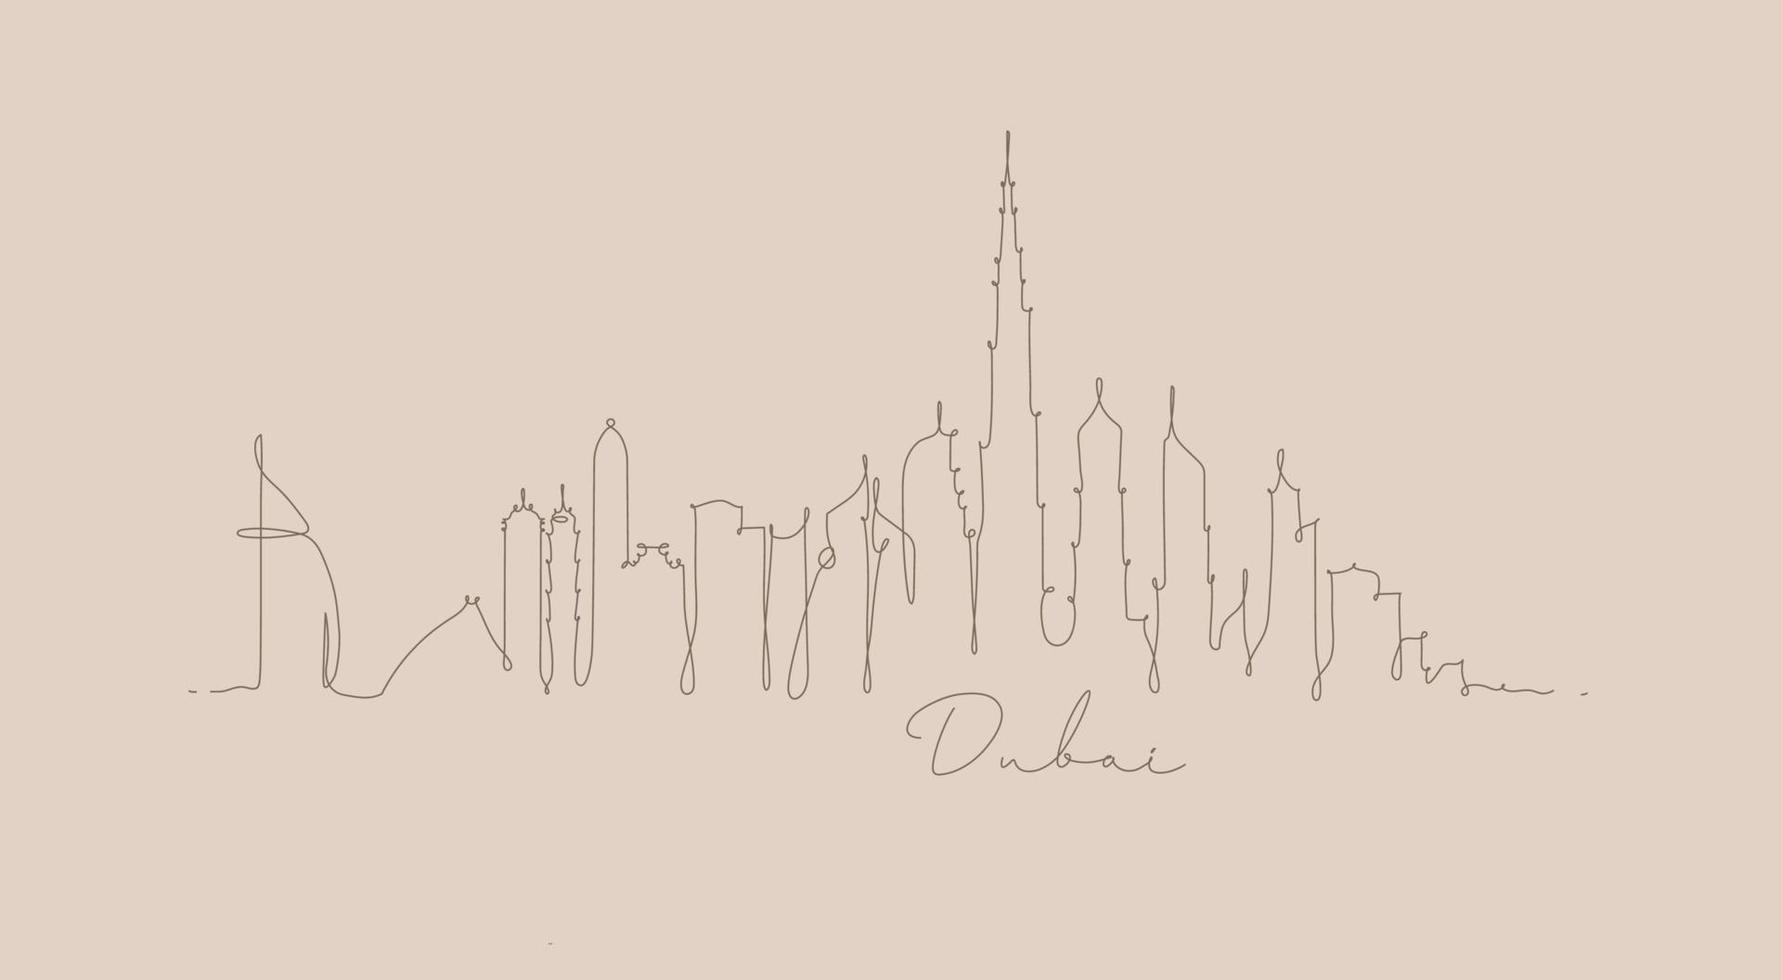 City silhouette dubai in pen line style drawing with brown lines on beige background vector